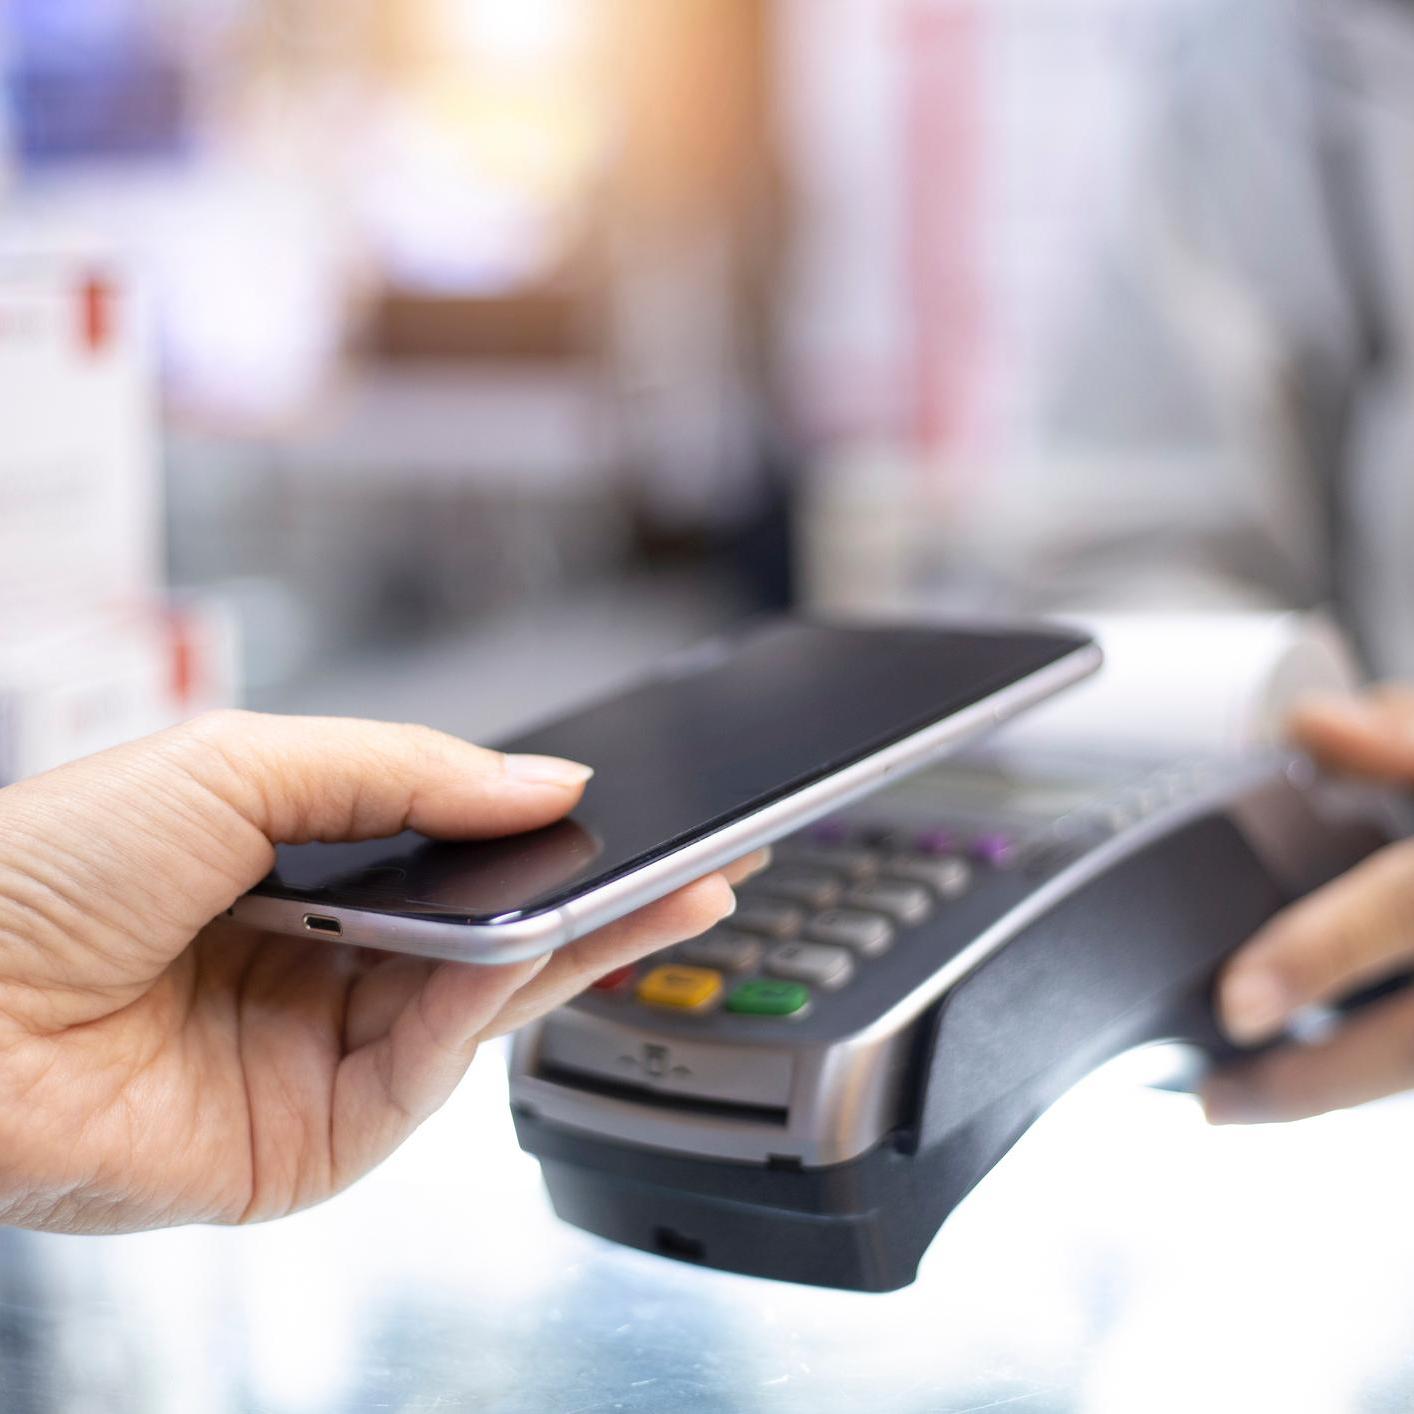 52% of UAE consumers plan to go cashless by 2024